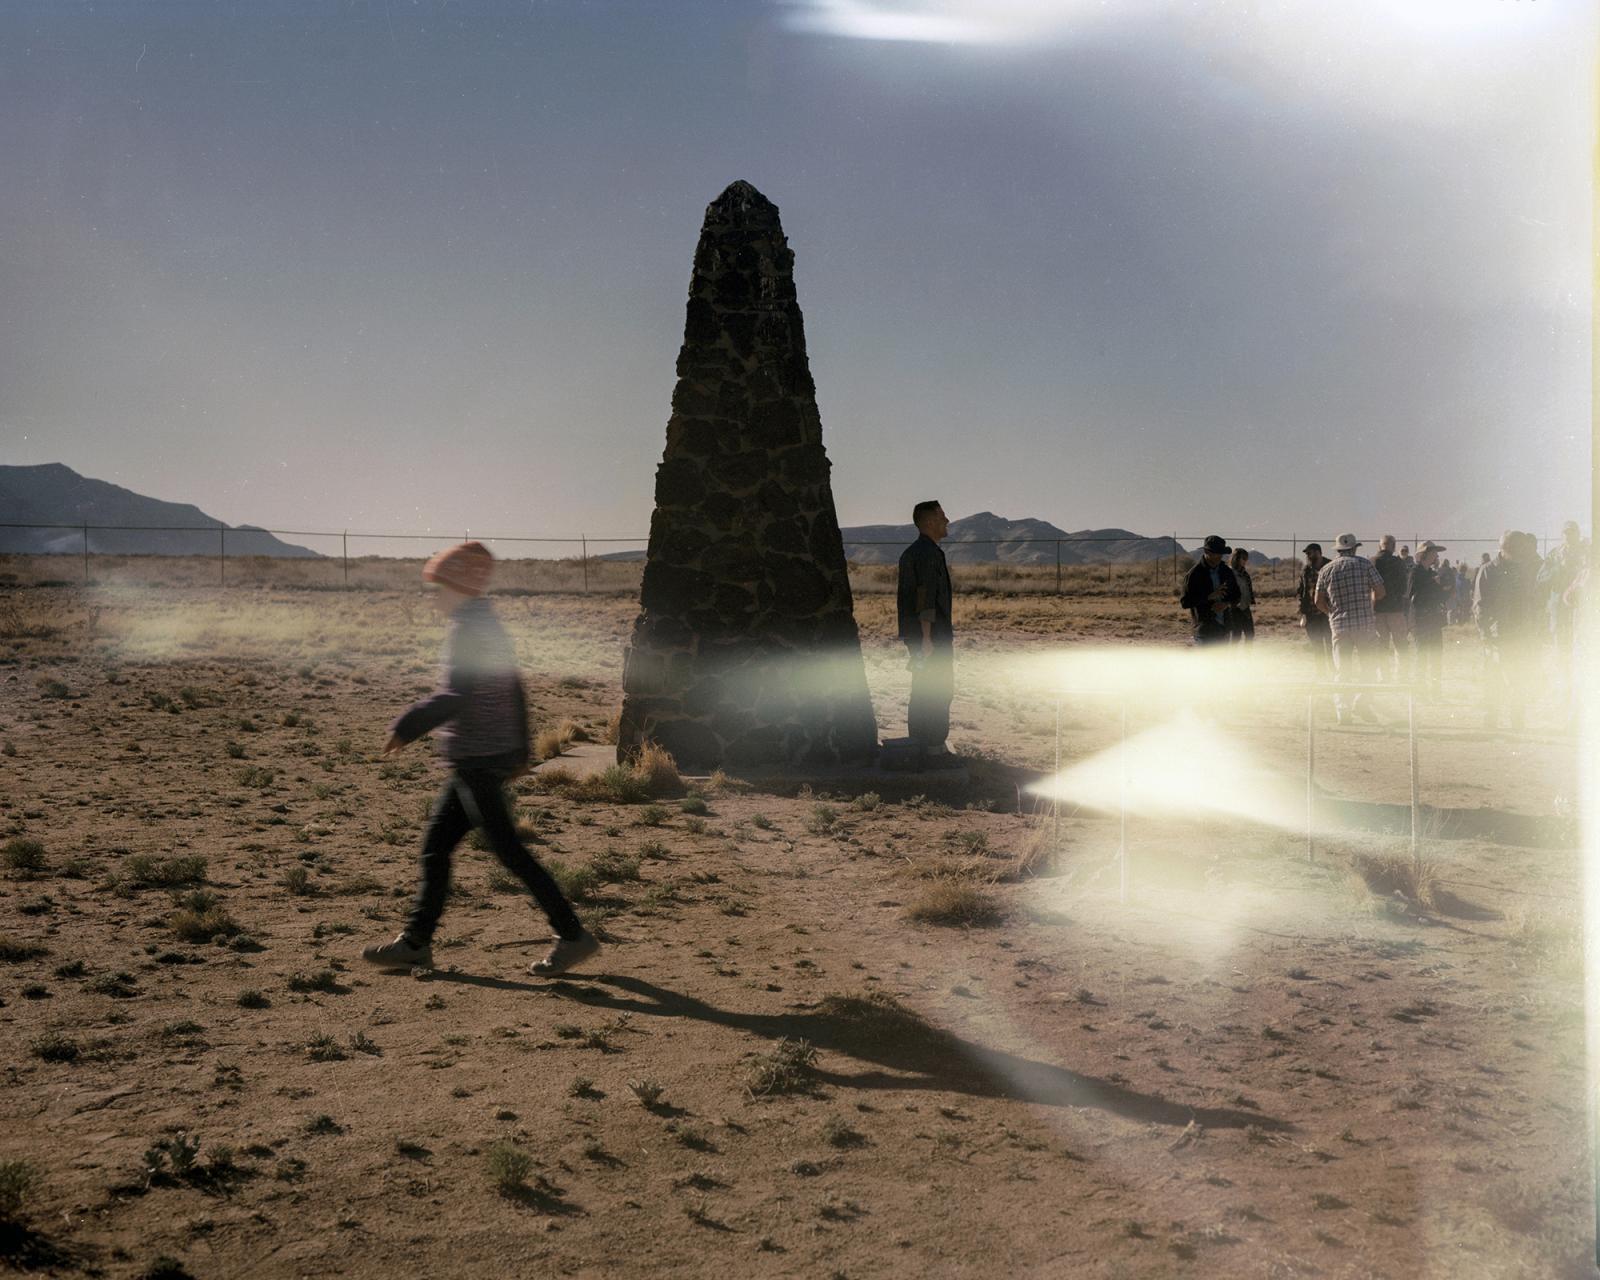 Trinity site, White Sands Missile Range, New Mexico, USA, April 2, 2016  The public gathers around the obelisk monument to the &nbsp;first atomic bomb detonation July 16, 1945. &nbsp; Radiation spread at least as far as Indiana, and the Wabash River, where Kodak Film Company sourced water for its paper mill to package its film. &nbsp;Customers ended up complaining that their film was fogged and the company secured a pledge form the Atomic Energy Commission to provide Kodak with dates and fallout patterns for future tests, thereby notifying corporate America, but not the American people, of the radiation risk. Today the site is a closed military zone opened only two days a year to public. &nbsp;Higher than normal radiation levels are still detected and residents of New Mexico claim that they have suffered cancer for generations as a result of the test but have never been compensated.